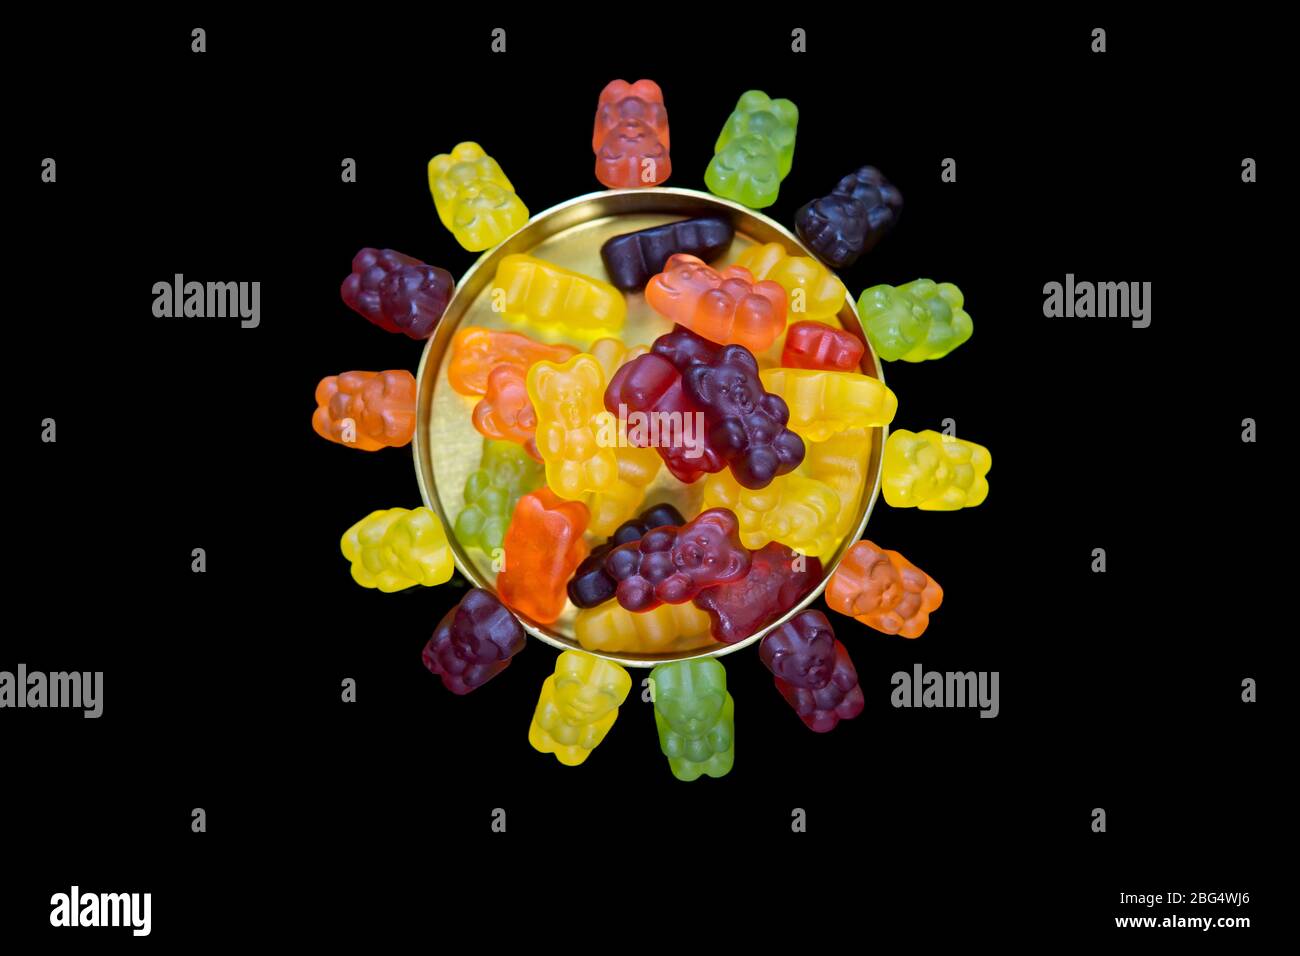 Gummy bears in a metal candy box and around it forming the sun on a black background Stock Photo